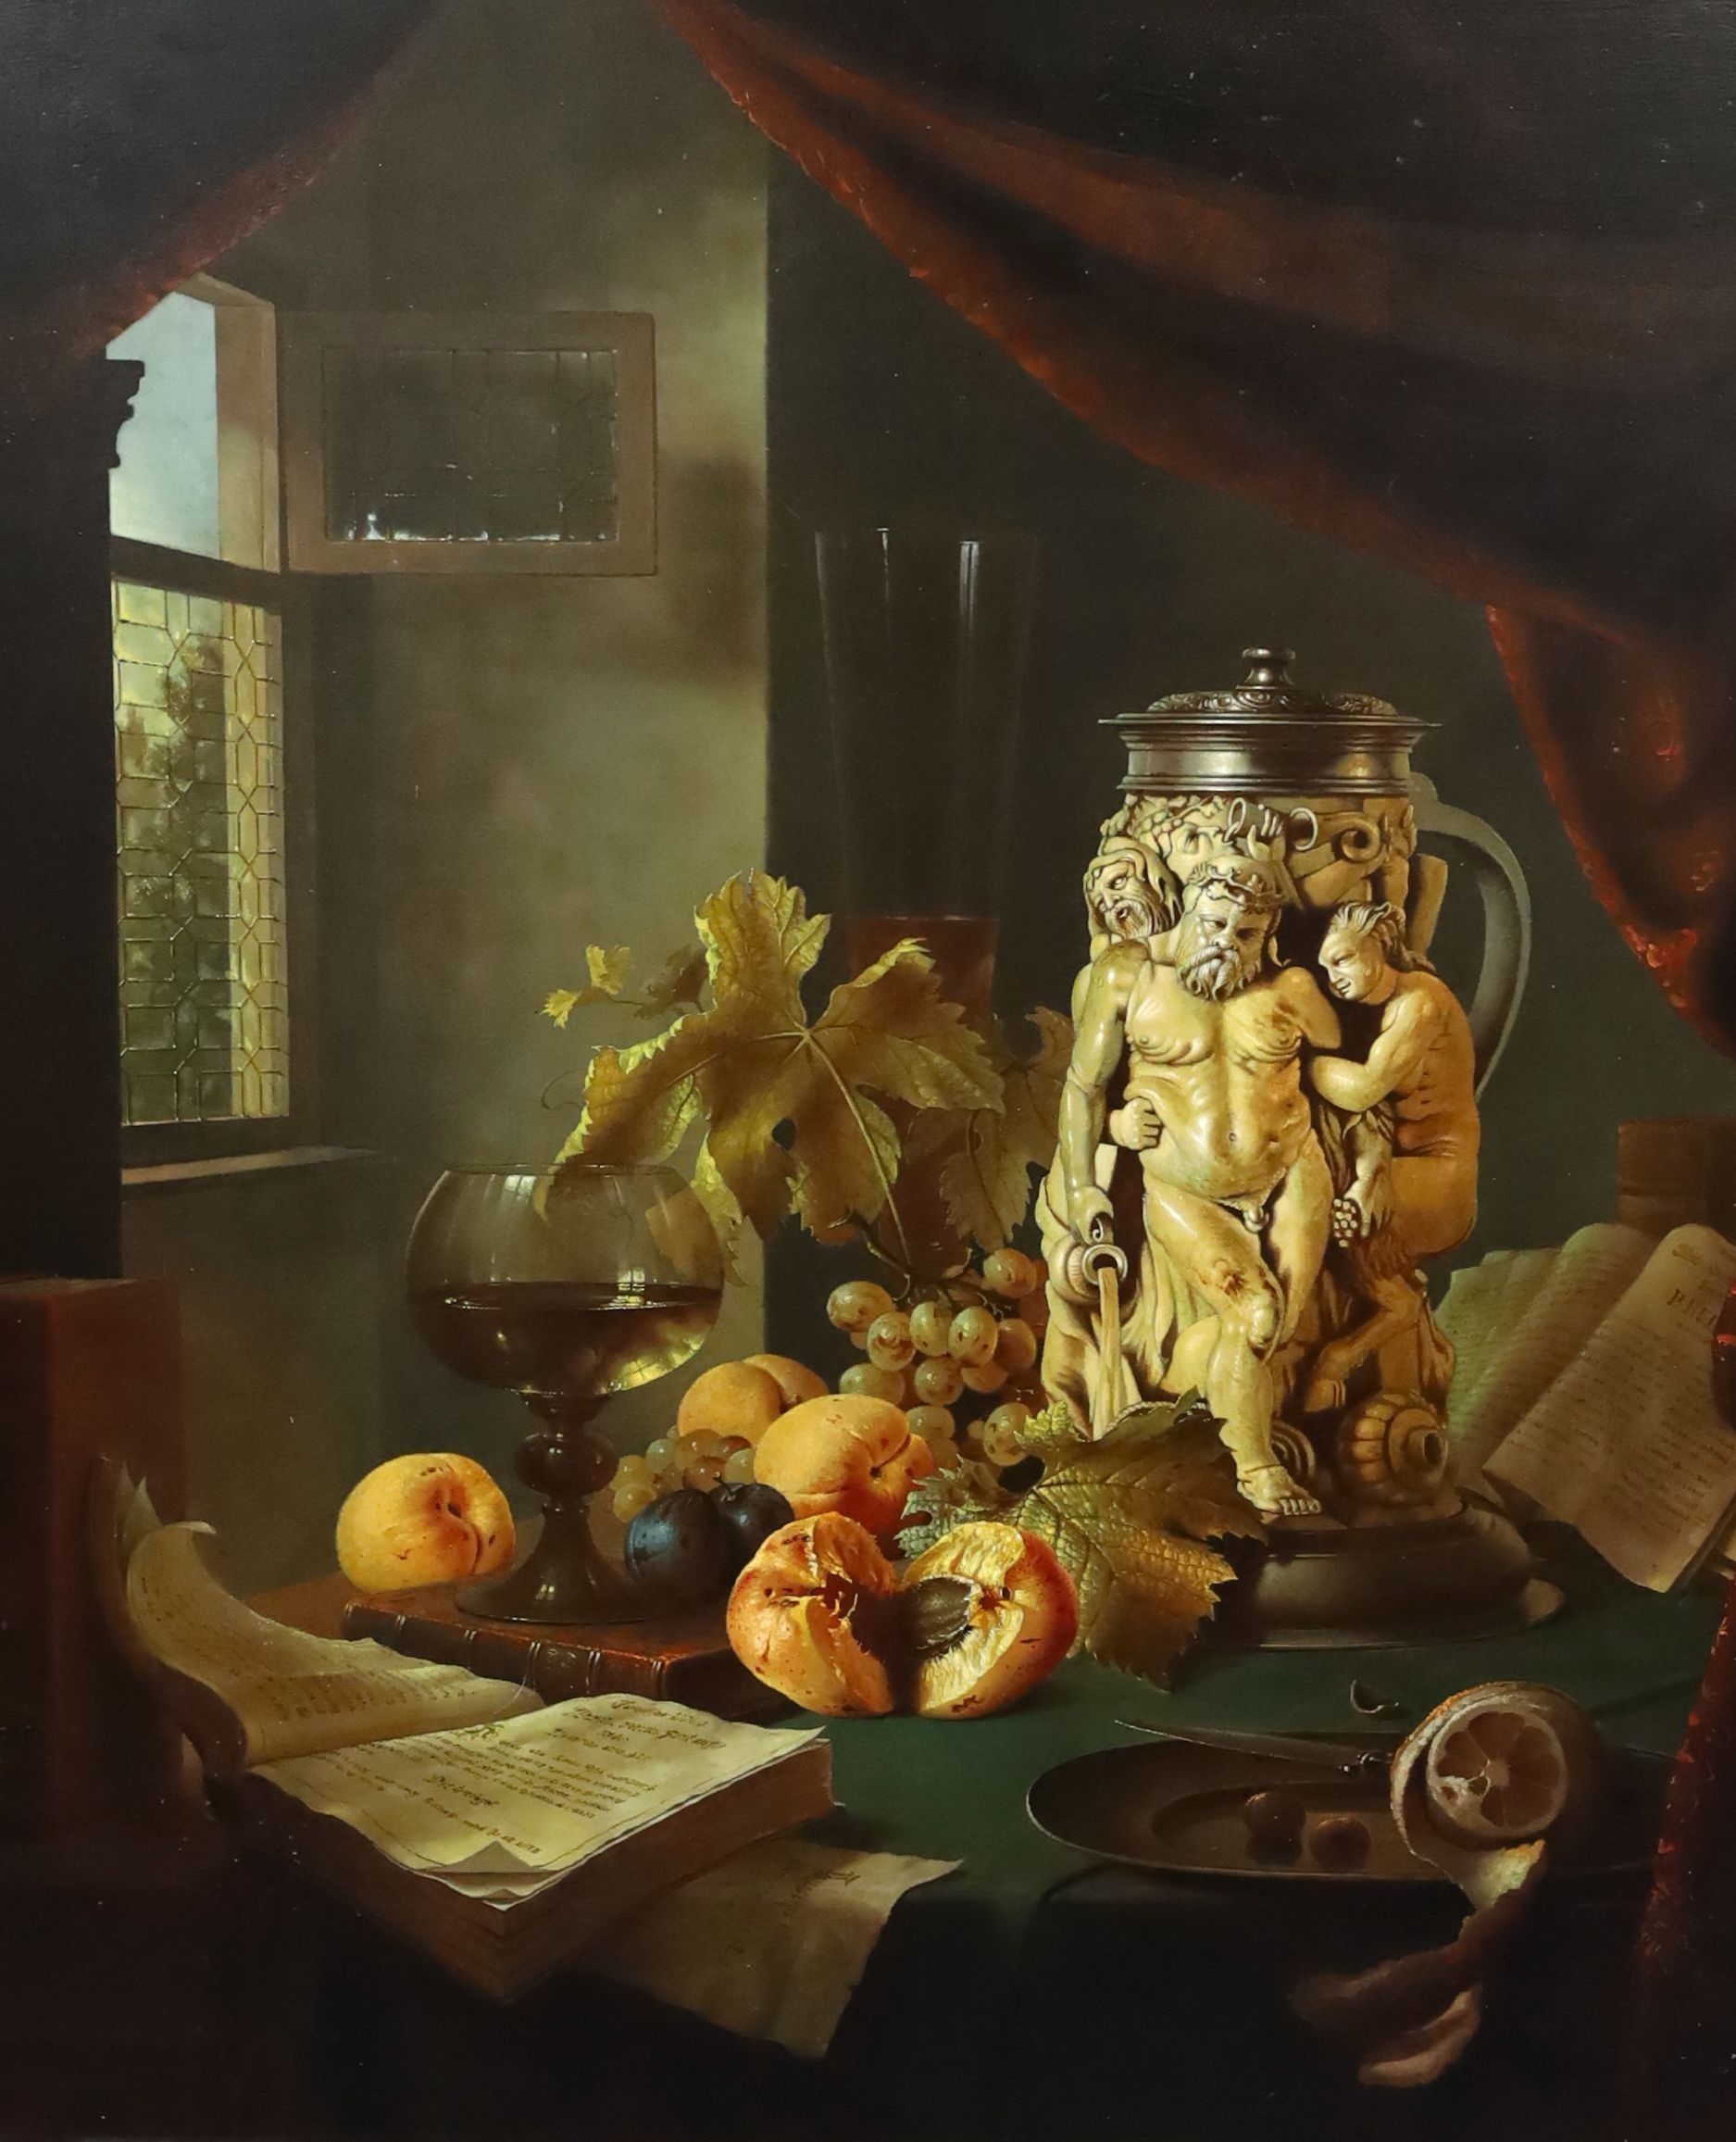 Gyula Bubarnik (Hungarian, 1936-2010), 17th century still life of a carved ivory goblet, fruit, a glass and a book upon a table top, with leaded window beyond, oil on board, 58 x 48cm